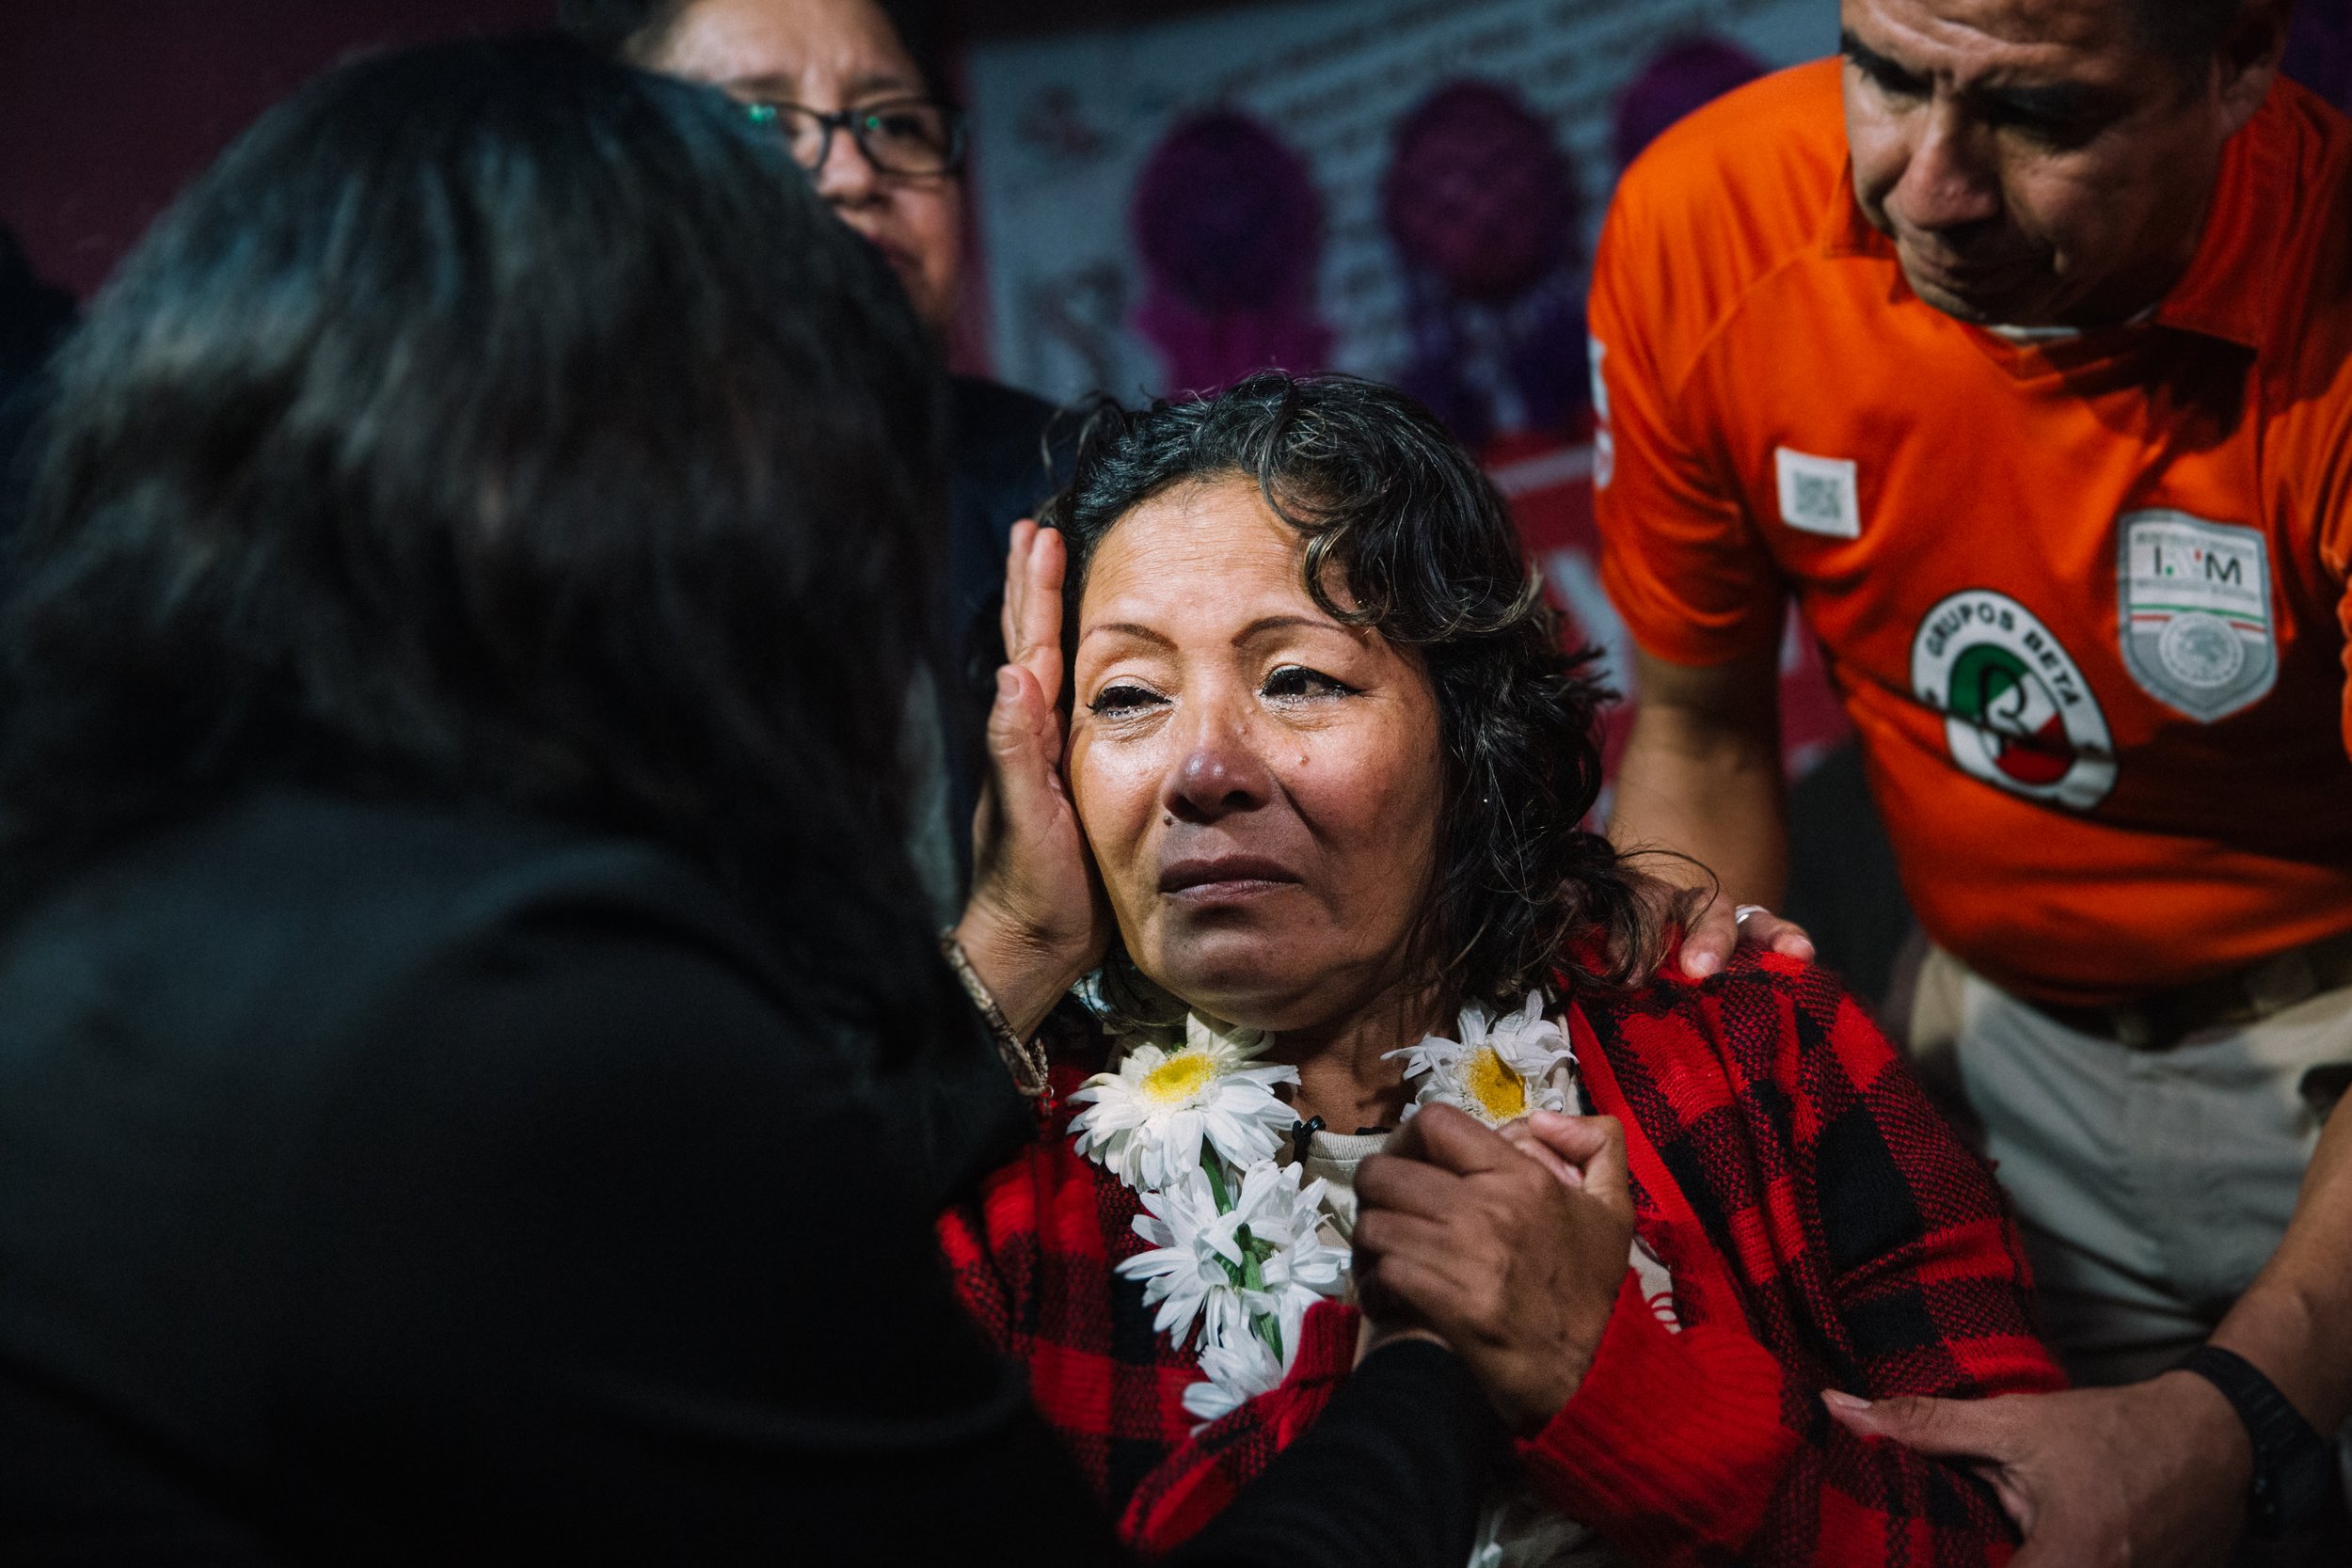  Aida Amalia Rodriguez Ordoñez comforts her sister Norma Janet Rodriguez Ordoñez during an emotional reunion after 37 years of no contact at the immigrant shelter Las Patronas in Veracruz, Mexico. While grateful for their reunion during the caravan t